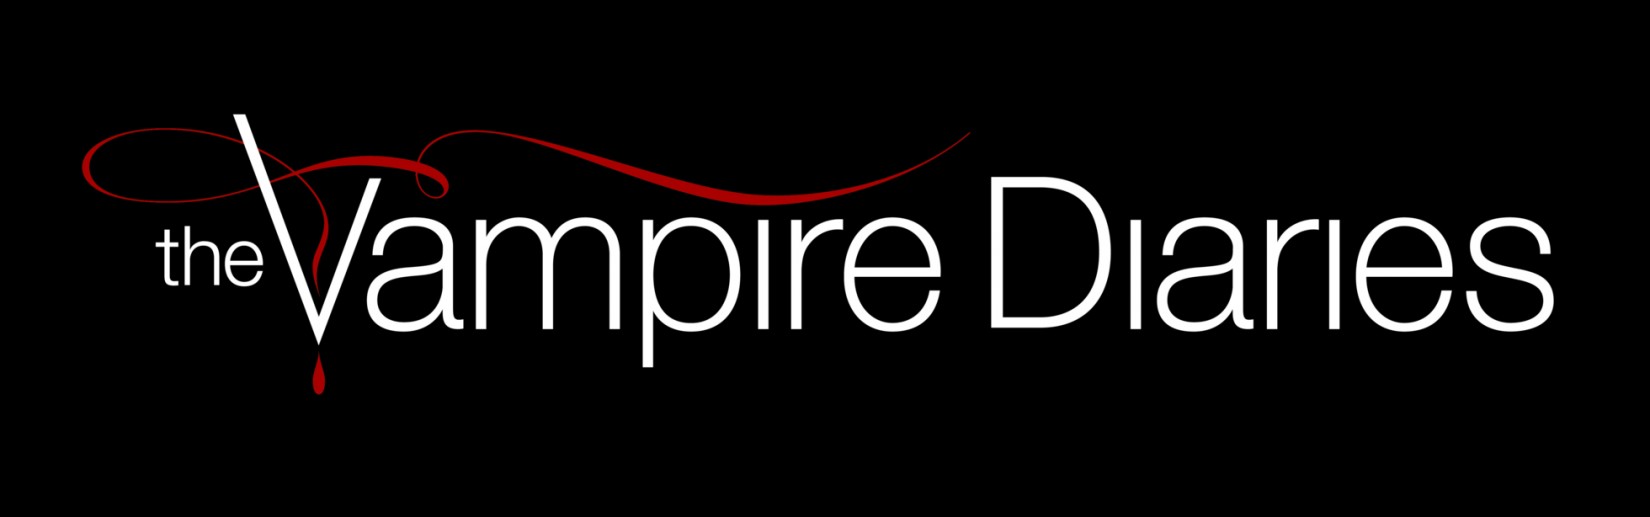 The Vampire Diaries logo and font? - forum | dafont.com